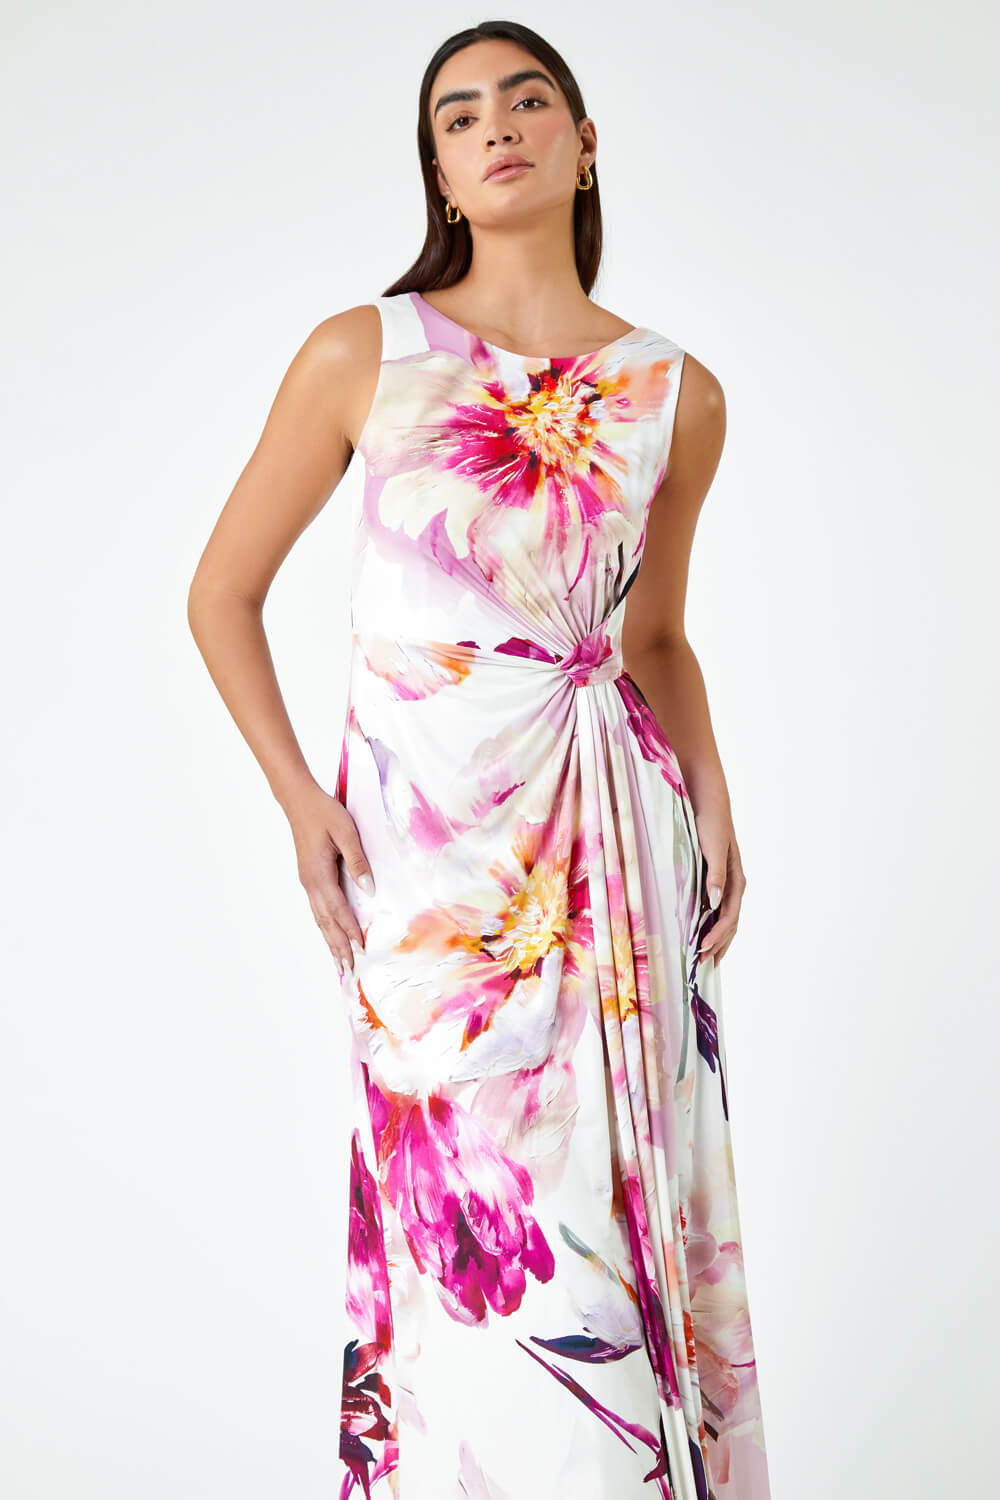 PINK Floral Drape Twist Ruched Maxi Dress, Image 5 of 6